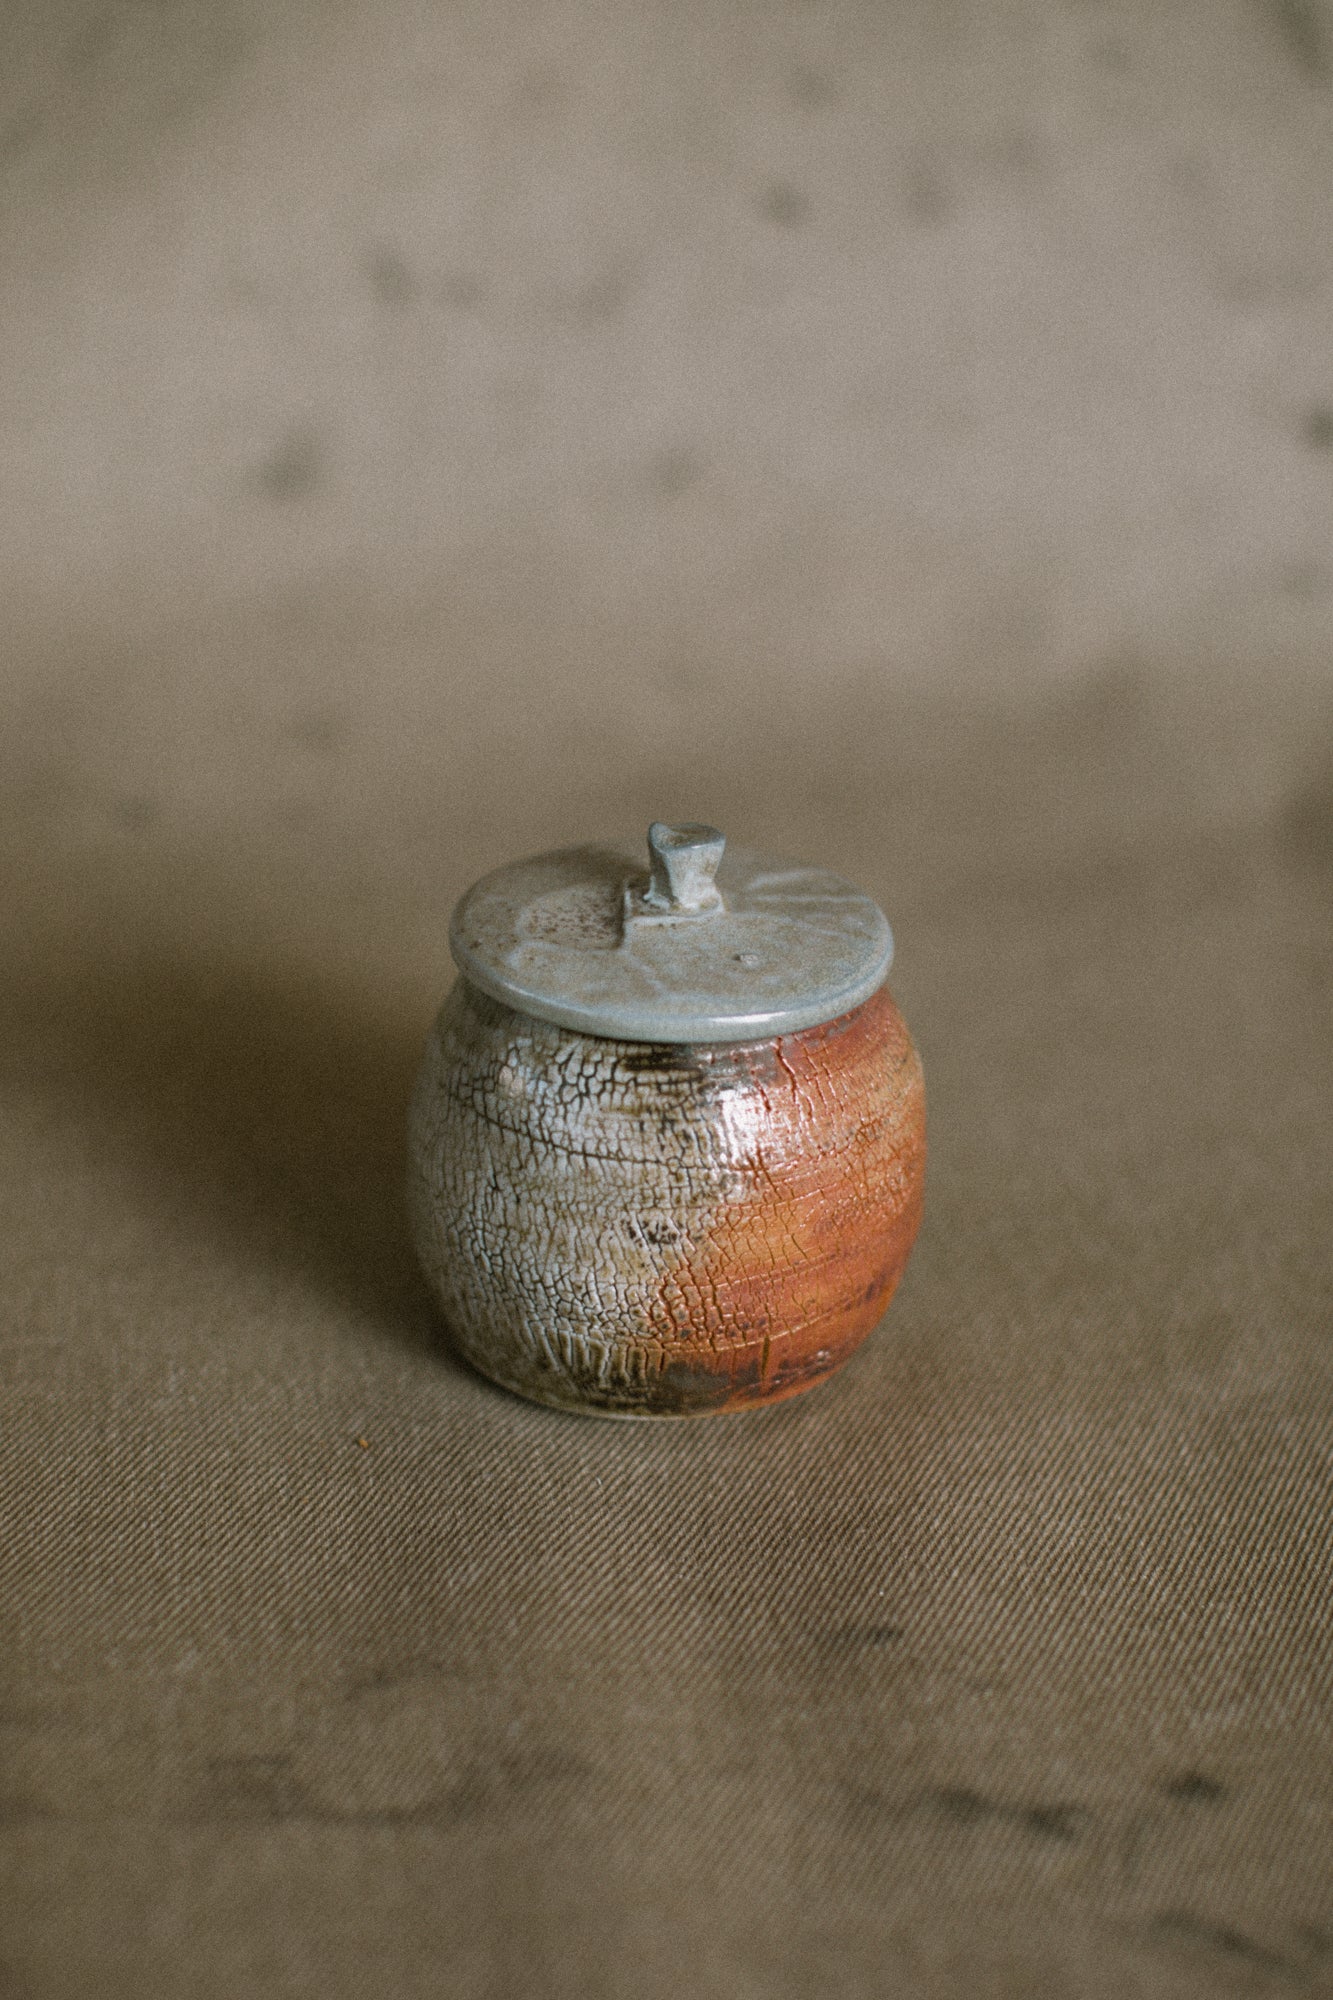 A grey and orange wood fired jar on a beige fabric background. This wheel thrown jar is made from white Australian stoneware clay with an orange wild clay slip covered in light green wood ash.